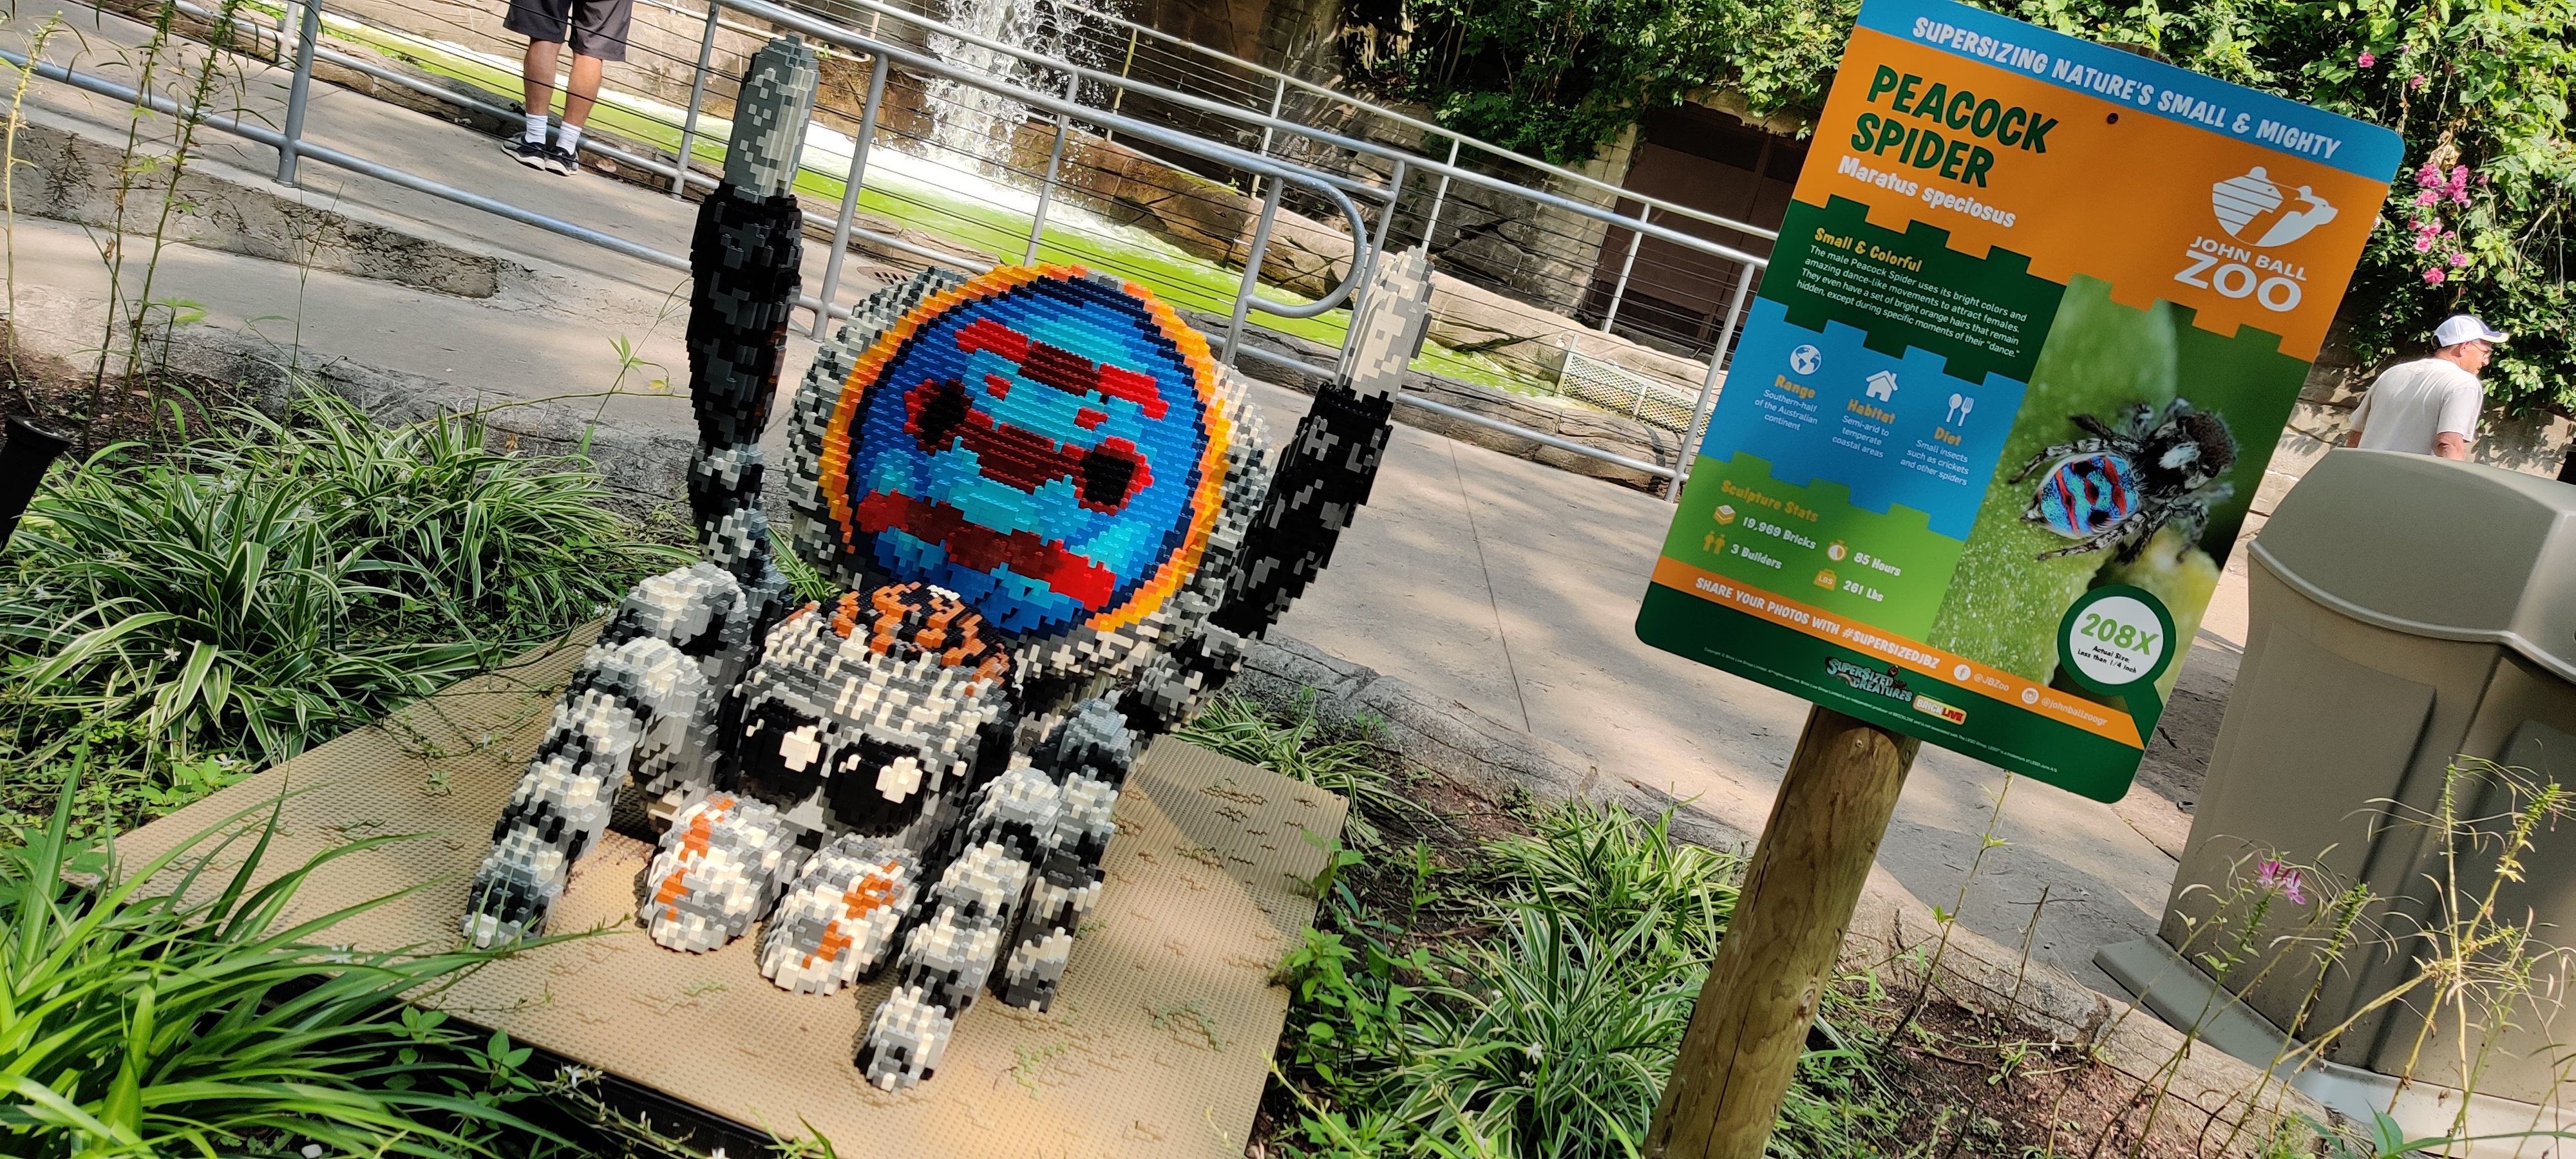 An adorable peacock spider made from LEGO